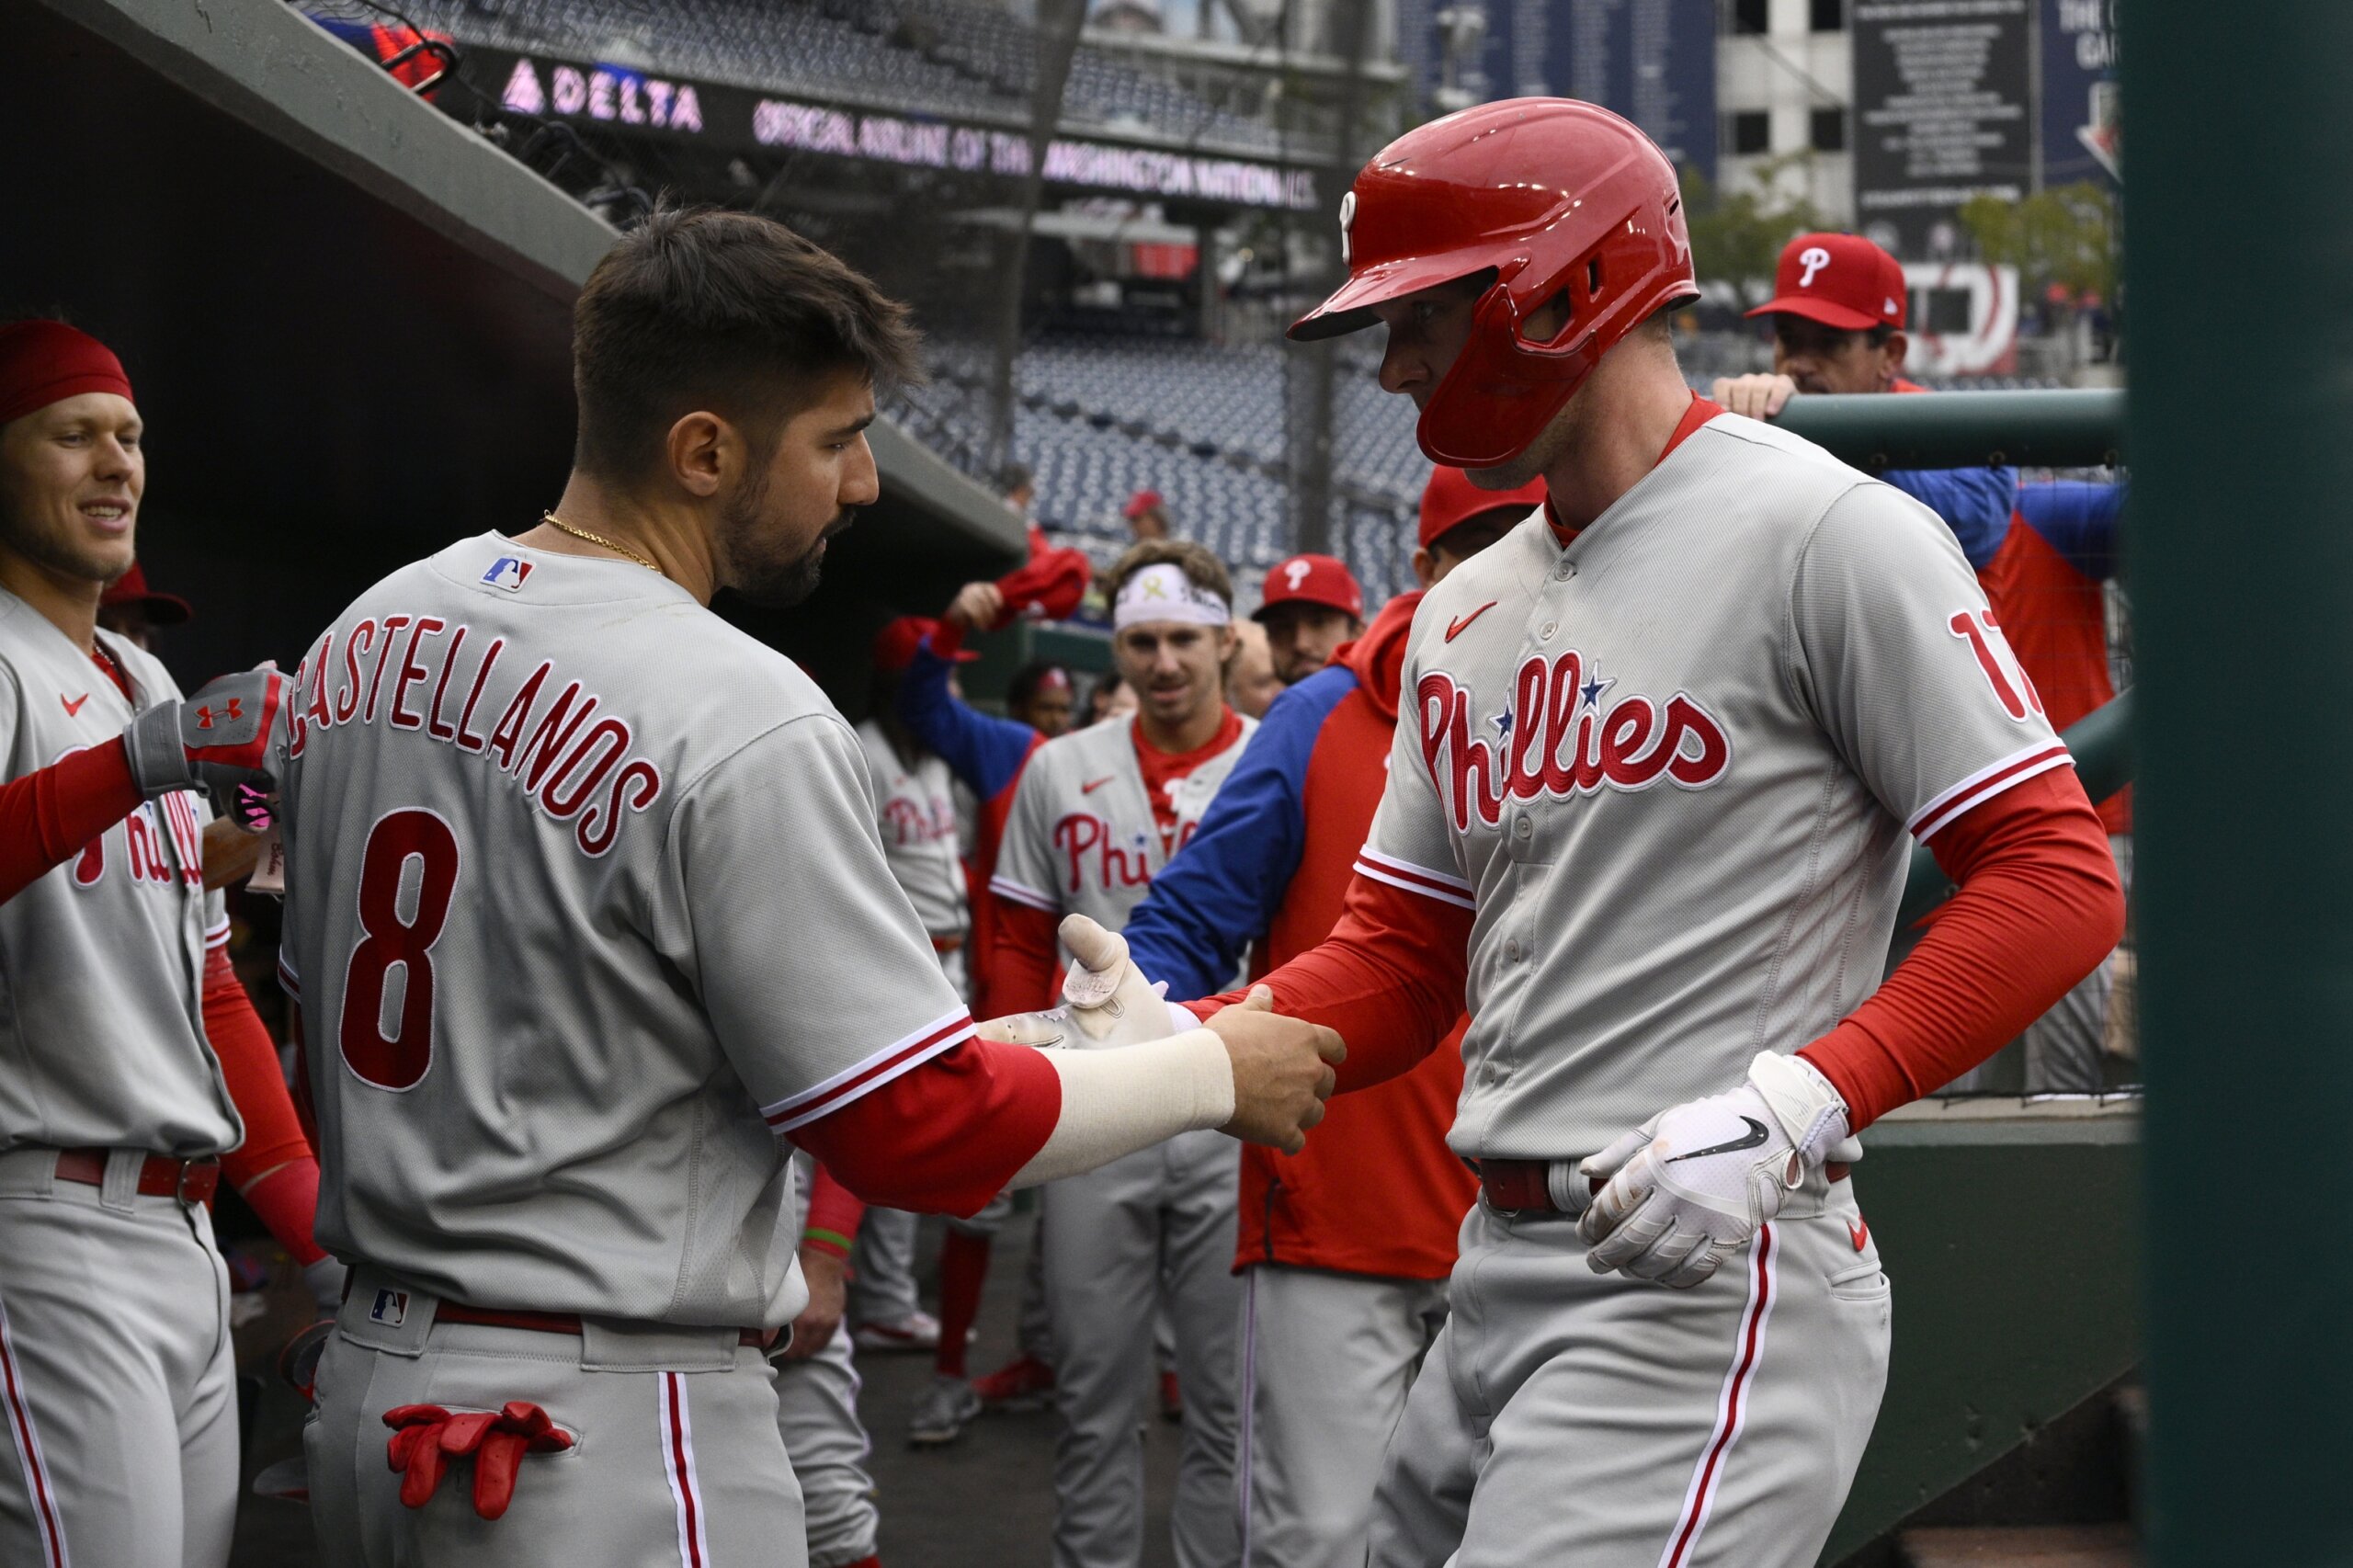 Now the Phillies and Chase Utley won't even talk about his health